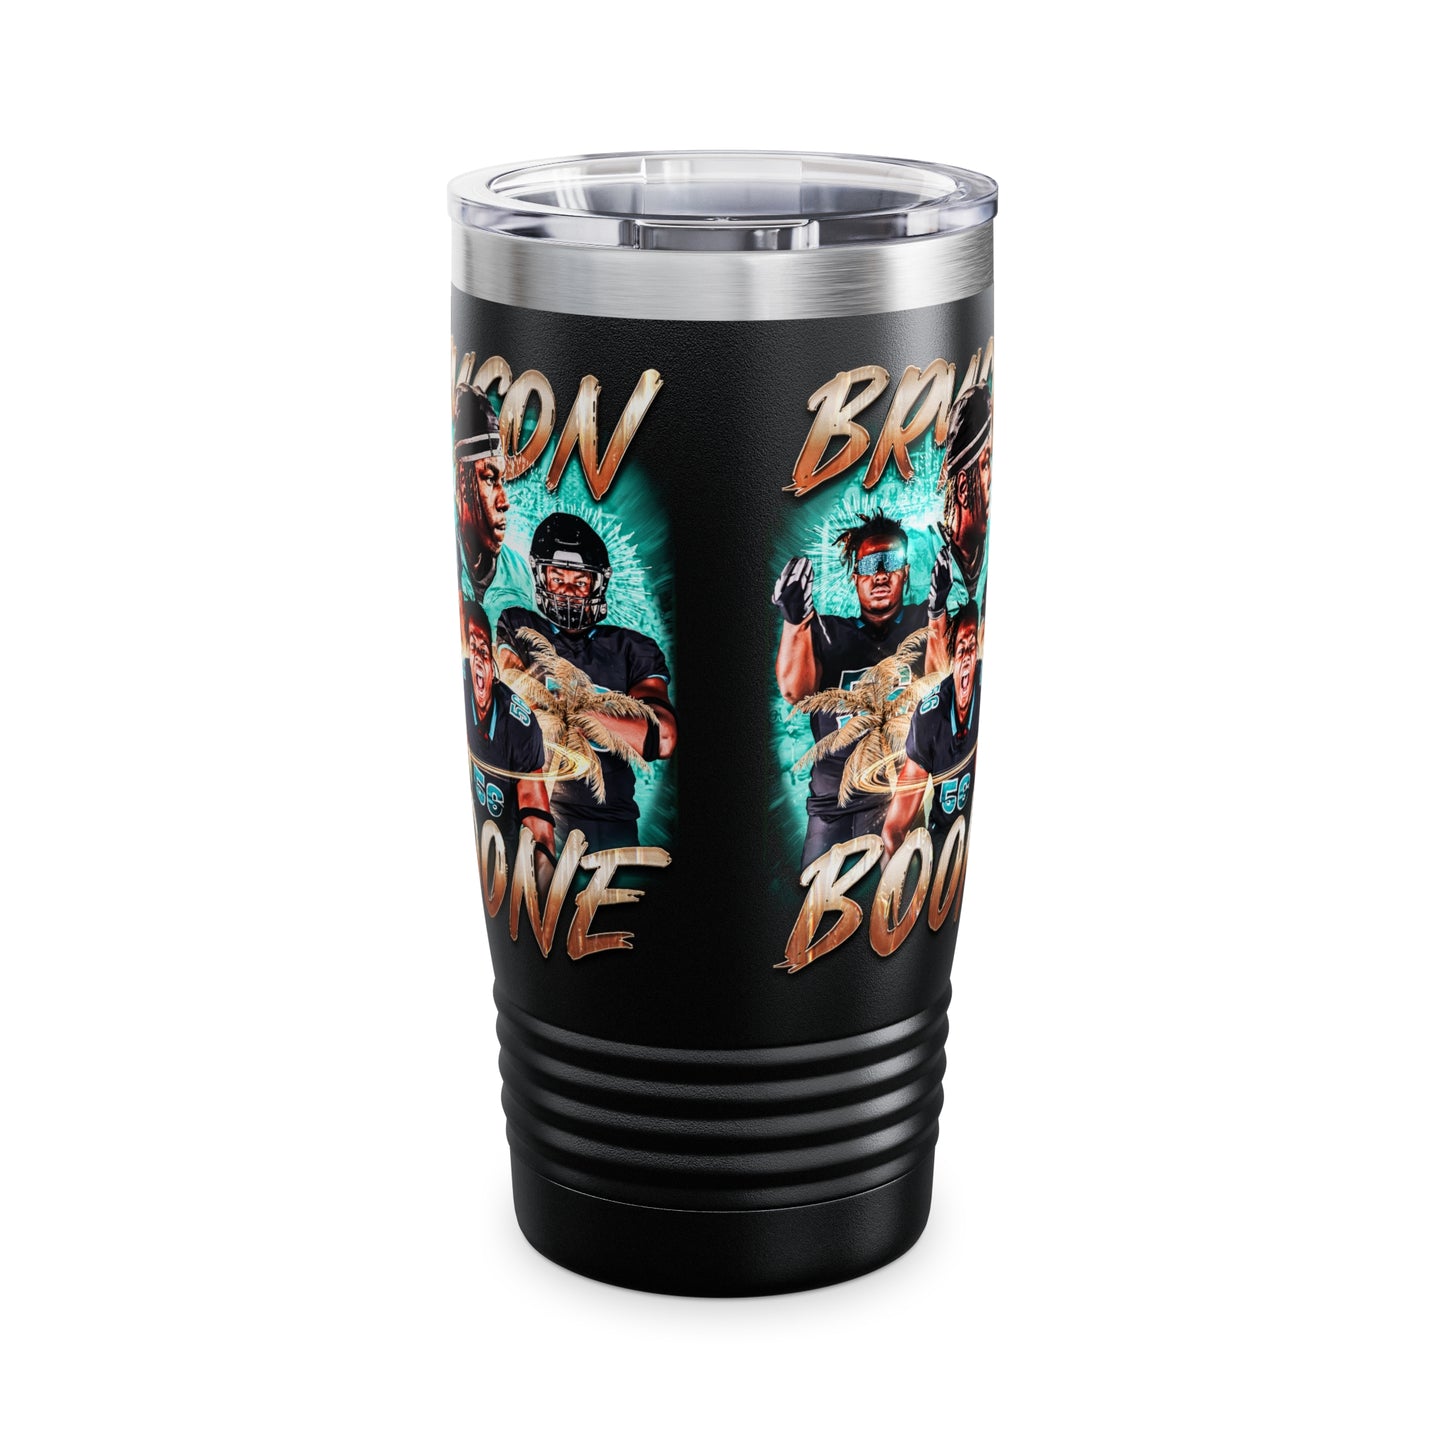 BRYSON BOONE STAINLESS STEEL TUMBLER